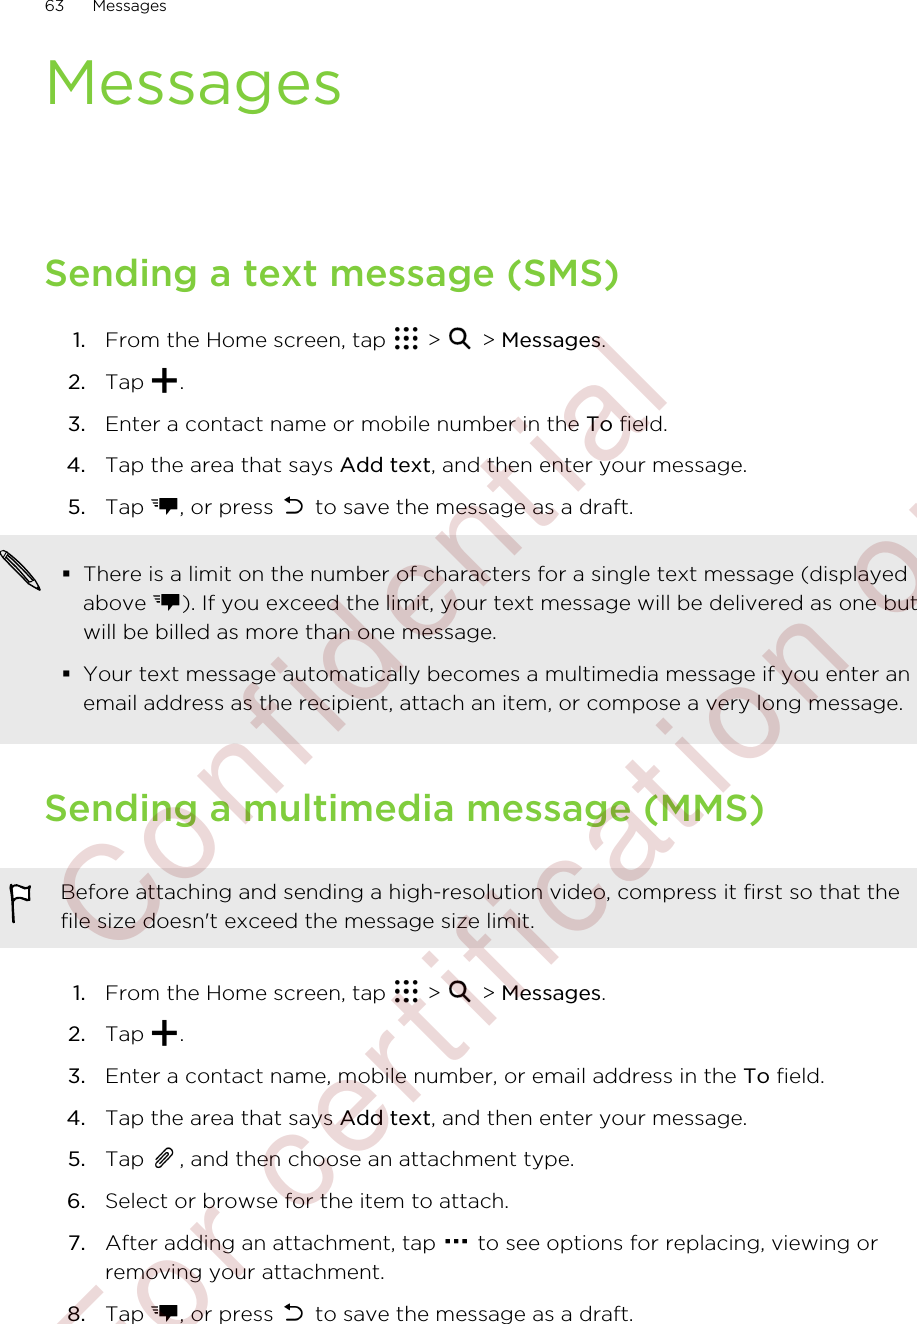 MessagesSending a text message (SMS)1. From the Home screen, tap   &gt;   &gt; Messages.2. Tap  .3. Enter a contact name or mobile number in the To field.4. Tap the area that says Add text, and then enter your message.5. Tap  , or press   to save the message as a draft. §There is a limit on the number of characters for a single text message (displayedabove  ). If you exceed the limit, your text message will be delivered as one butwill be billed as more than one message.§Your text message automatically becomes a multimedia message if you enter anemail address as the recipient, attach an item, or compose a very long message.Sending a multimedia message (MMS)Before attaching and sending a high-resolution video, compress it first so that thefile size doesn&apos;t exceed the message size limit.1. From the Home screen, tap   &gt;   &gt; Messages.2. Tap  .3. Enter a contact name, mobile number, or email address in the To field.4. Tap the area that says Add text, and then enter your message.5. Tap  , and then choose an attachment type.6. Select or browse for the item to attach.7. After adding an attachment, tap   to see options for replacing, viewing orremoving your attachment.8. Tap  , or press   to save the message as a draft.63 Messages        Confidential  For certification only